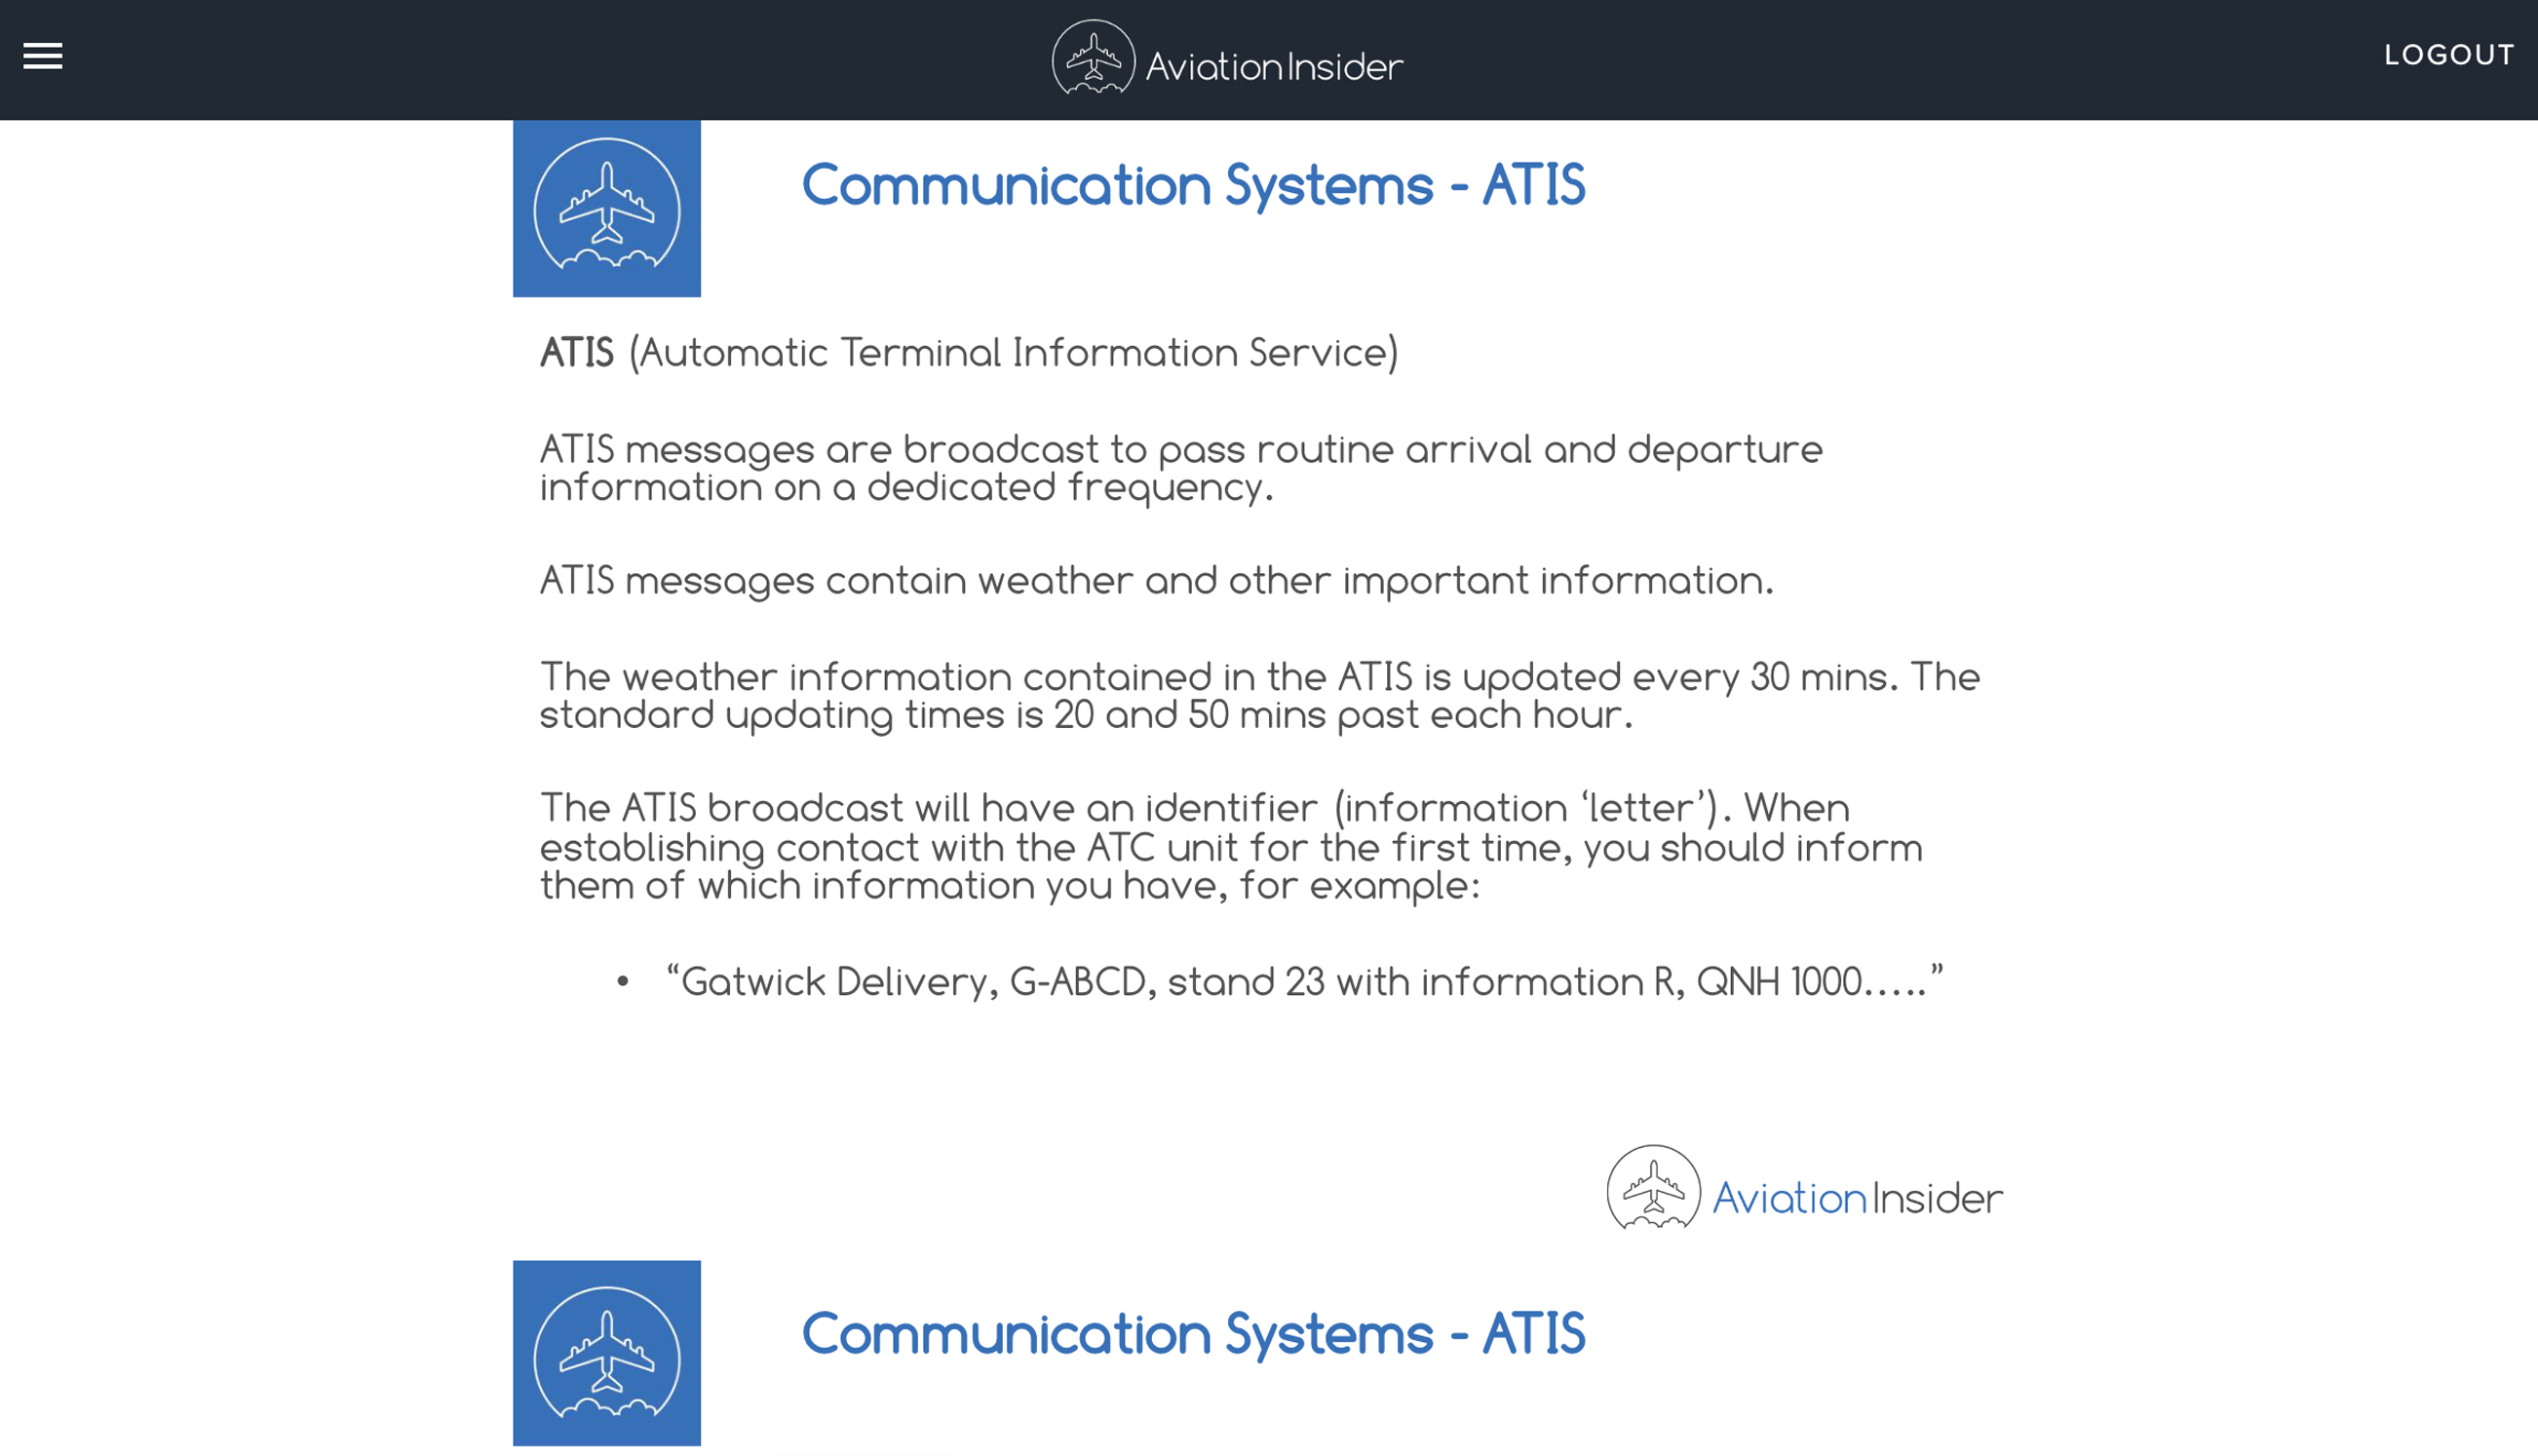 ATPL REVISION NOTES VFR AND IFR COMMUNICATIONS – REFRESHER REVISION NOTESImage Id:152546